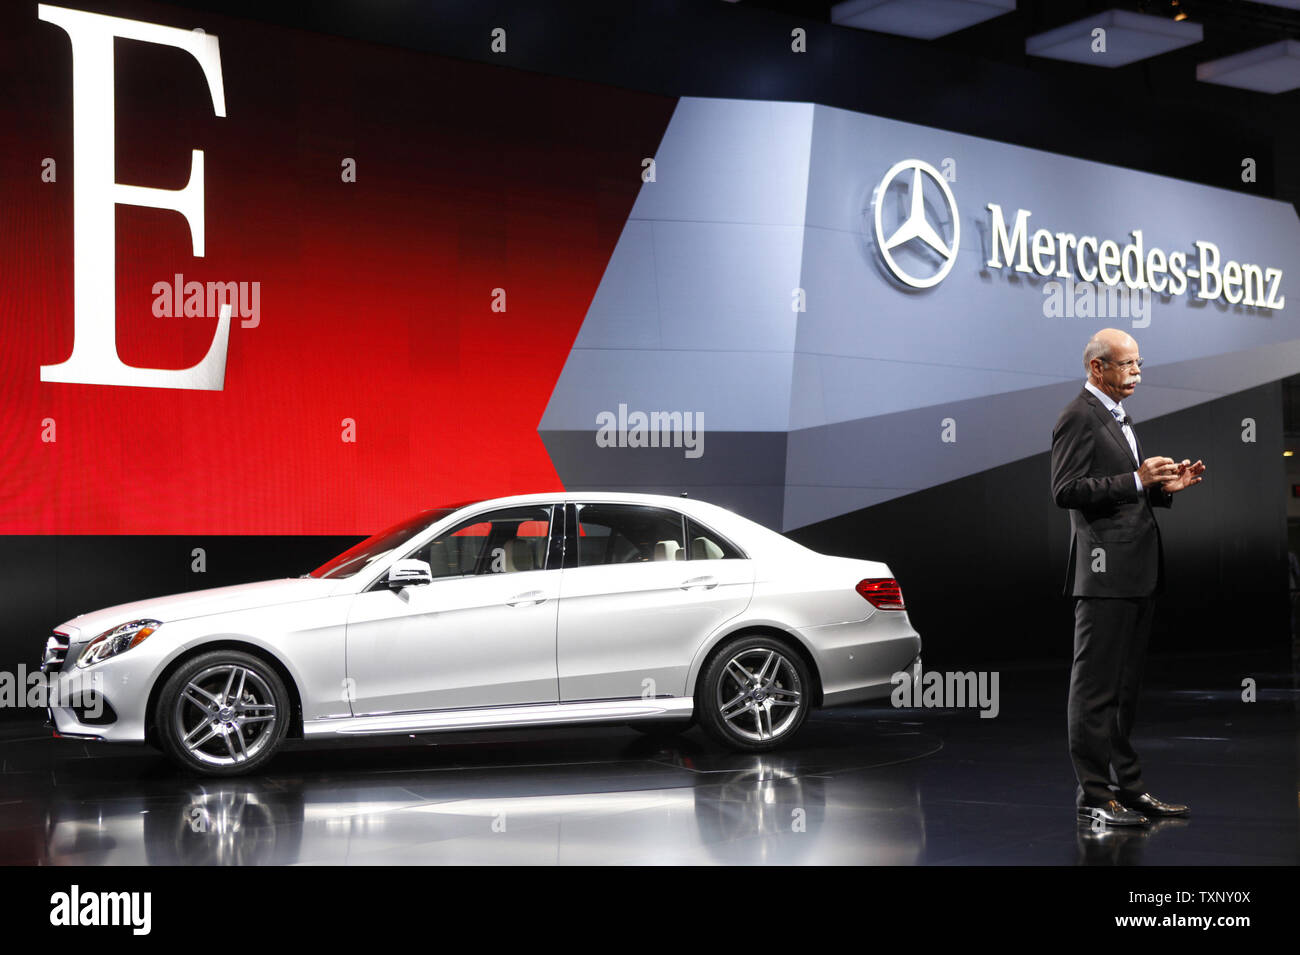 Dr. Dieter Zetsche, Chairman of the Board of Daimler speaks at the presentation of the new Mercedes-Benz E-Class at the 2013 North American International Auto Show at the Cobo Center in Detroit, January 14, 2013. UPI/Mark Cowan Stock Photo